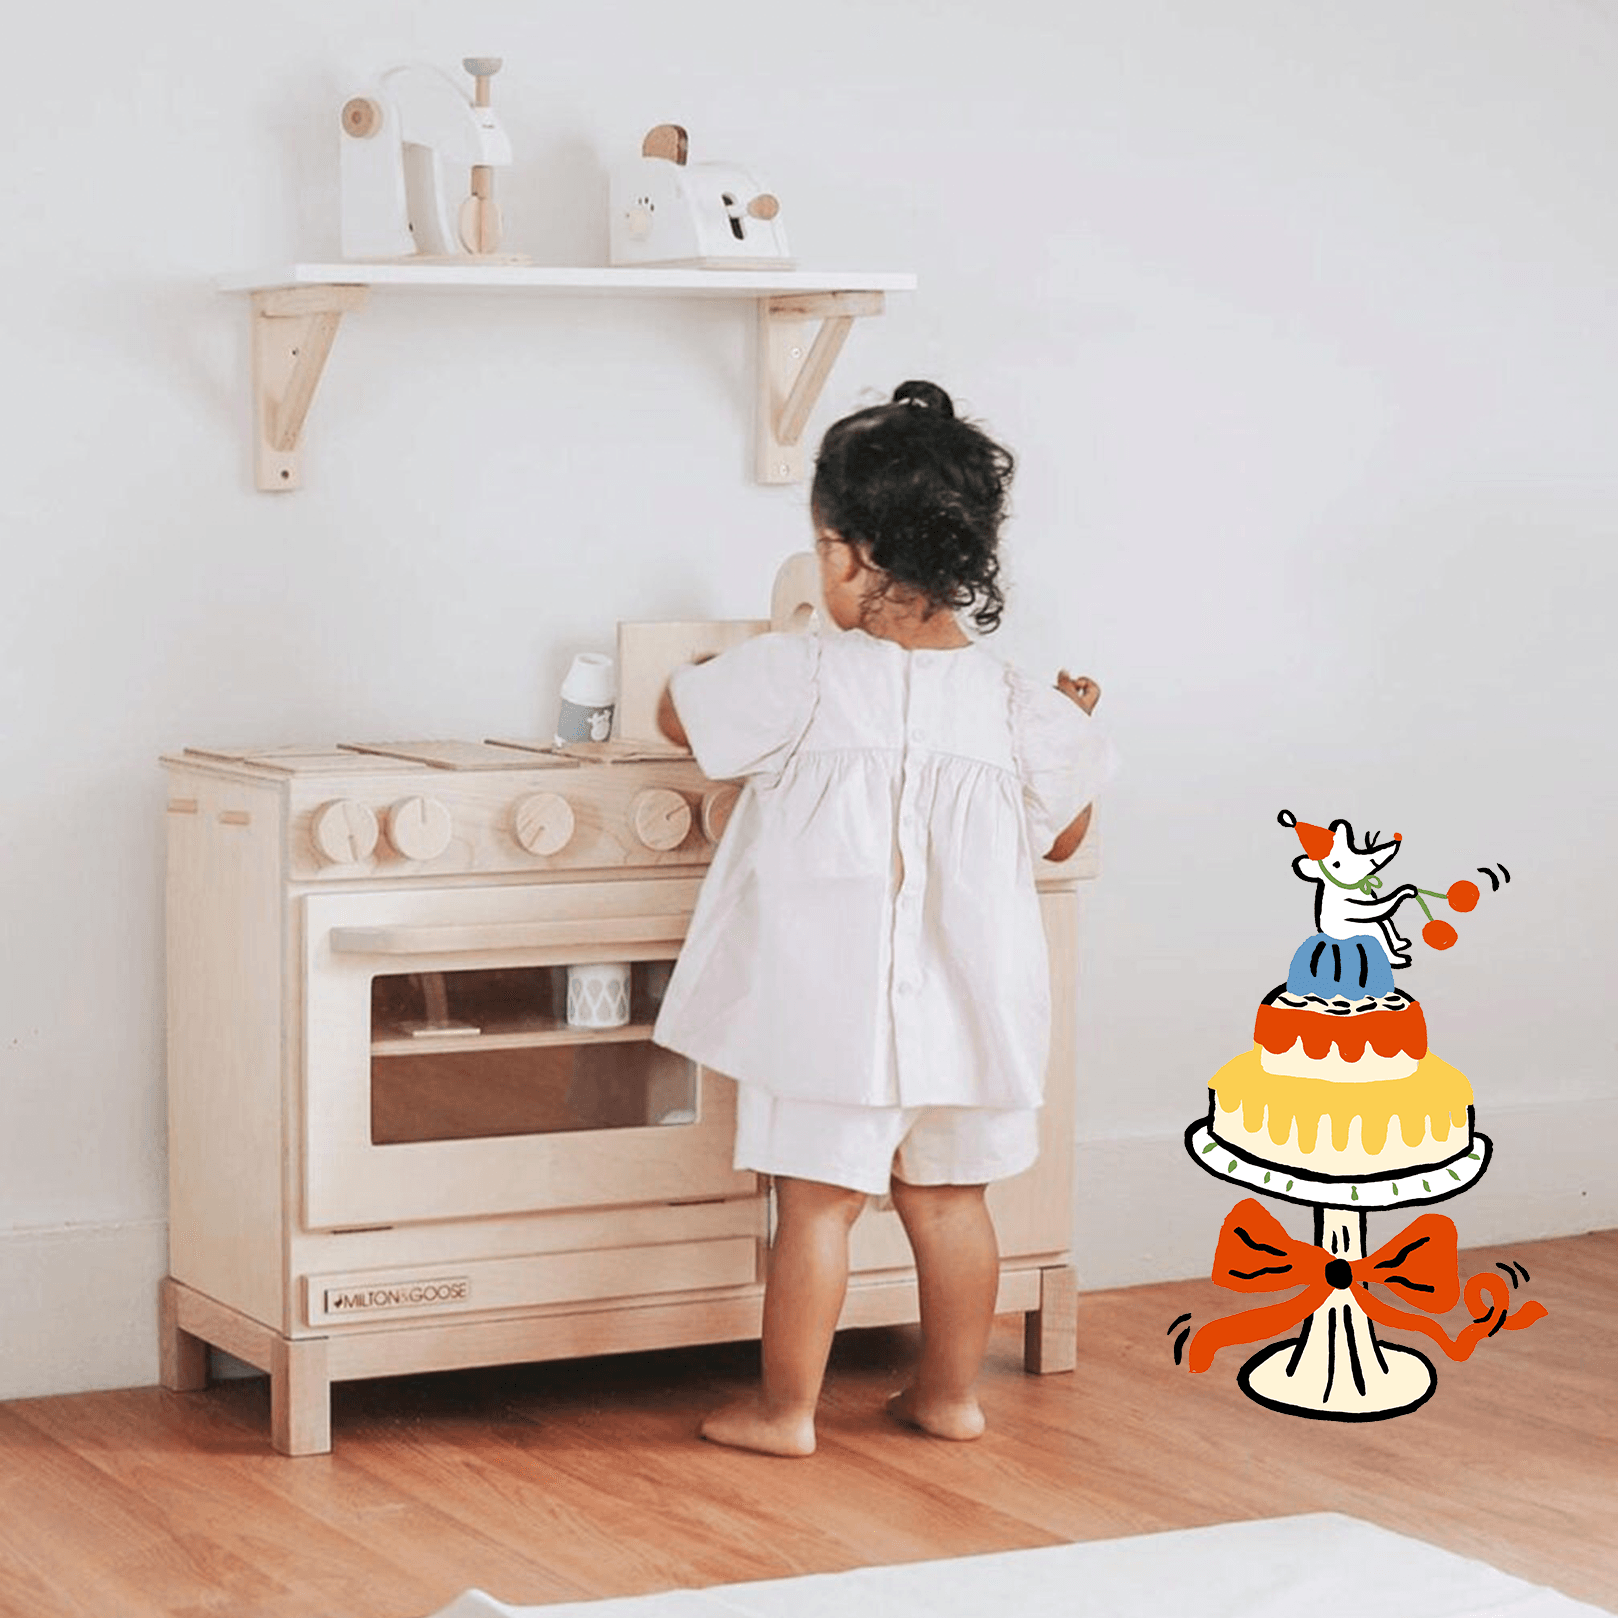 Child playing with a Milton & Goose play kitchen